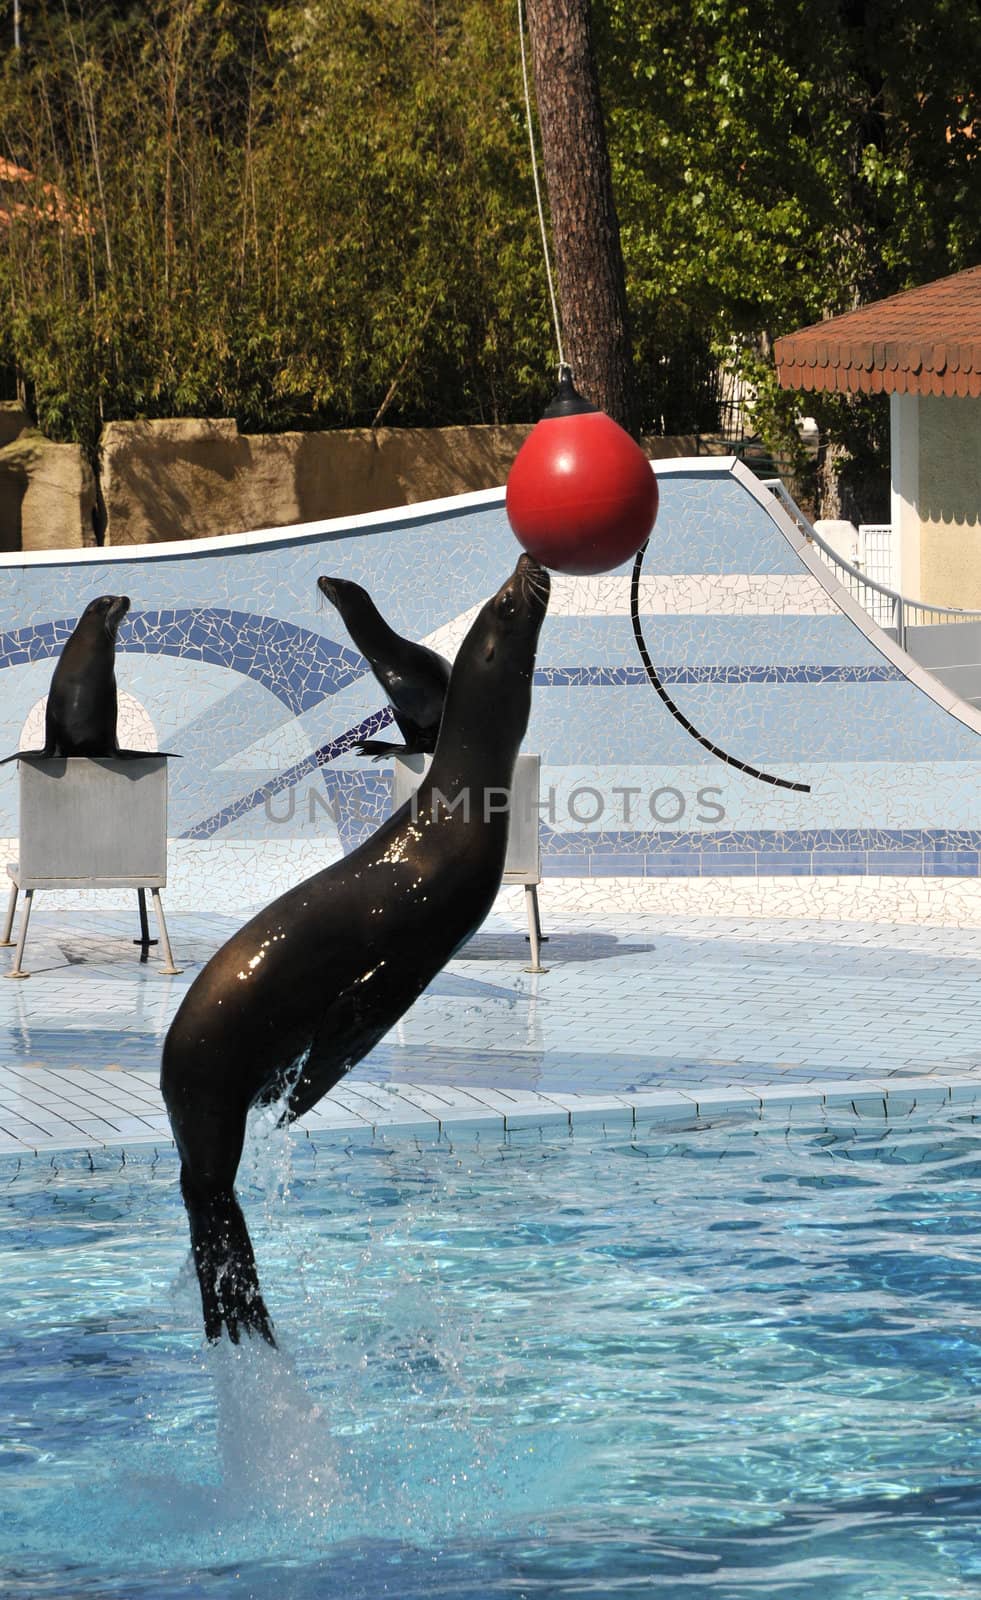 Sea Lion Jumping to Touch a Red Ball by shkyo30